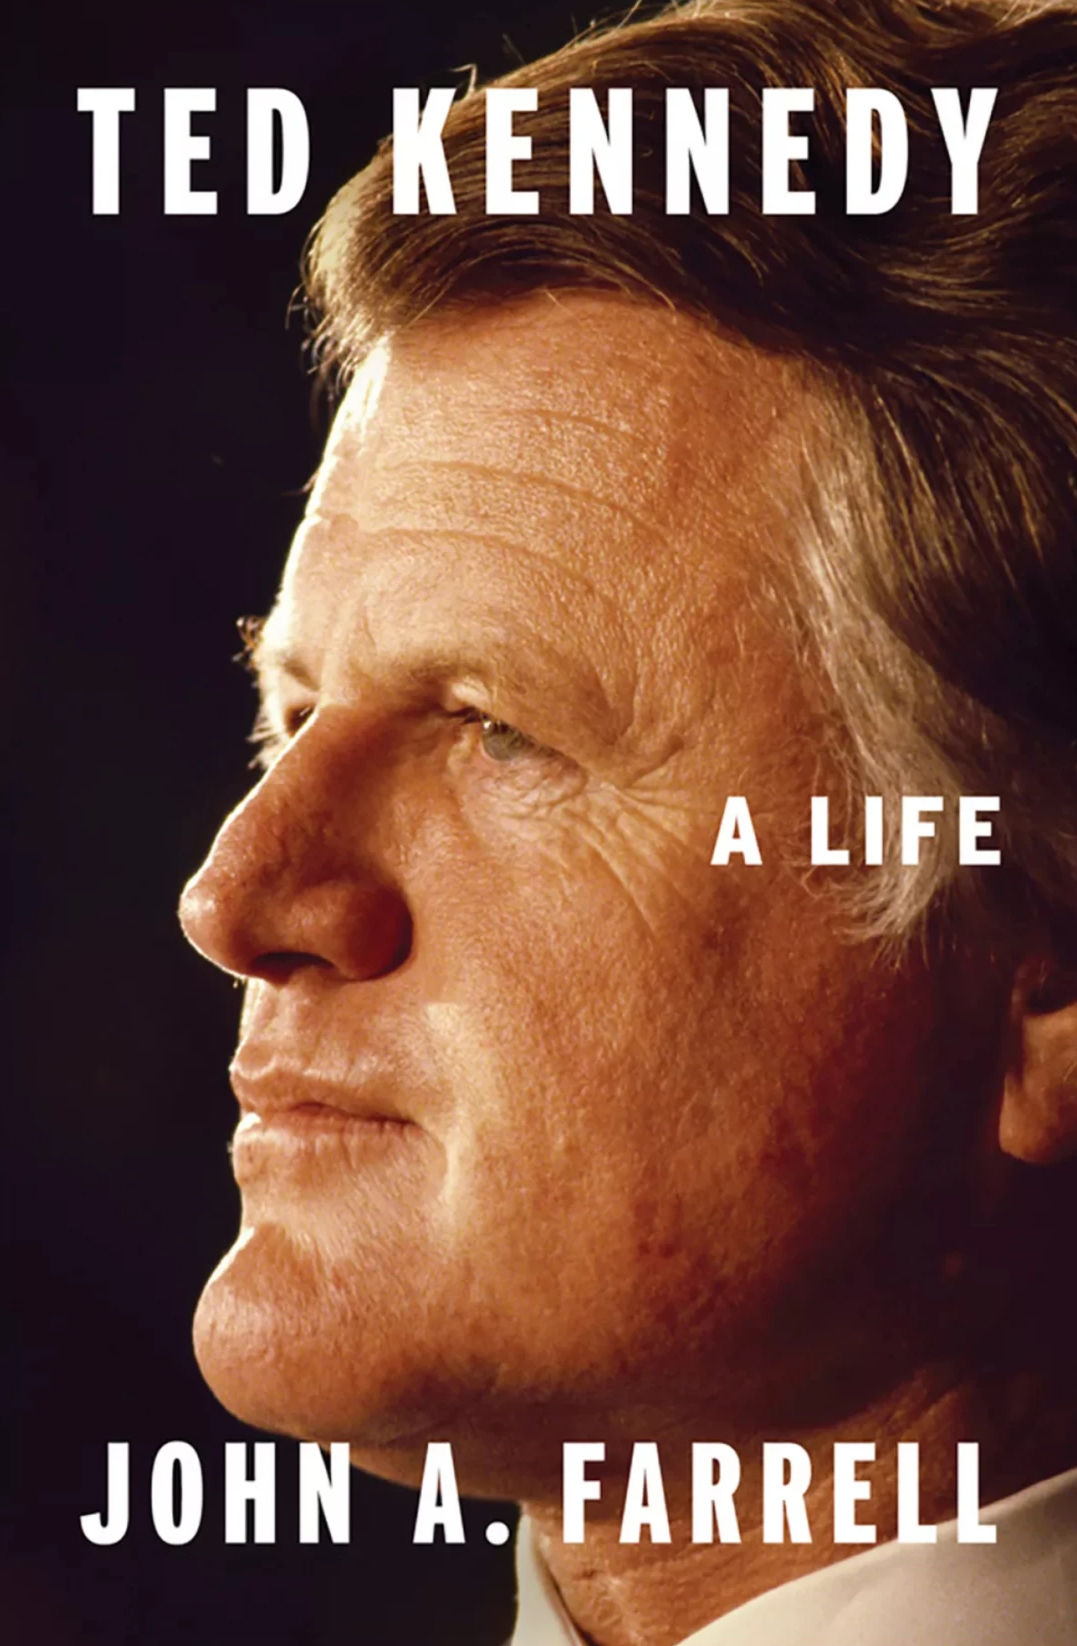 Ted Kennedy: A Life book cover